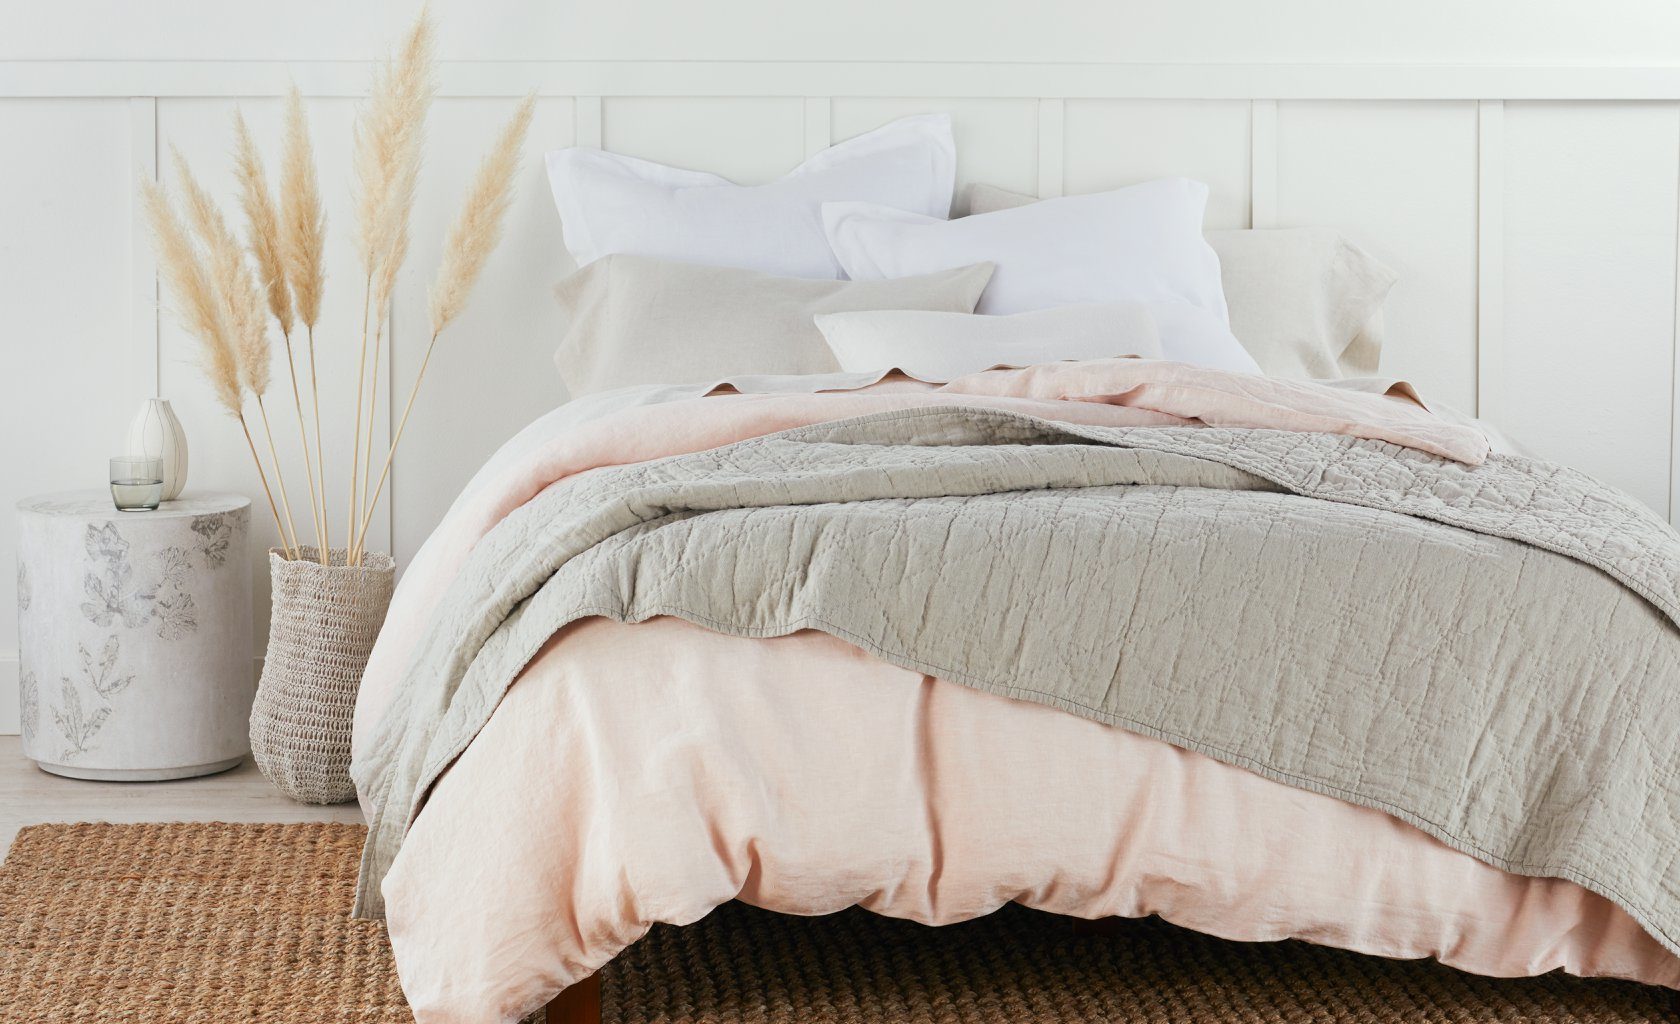 Types of natural bedding material